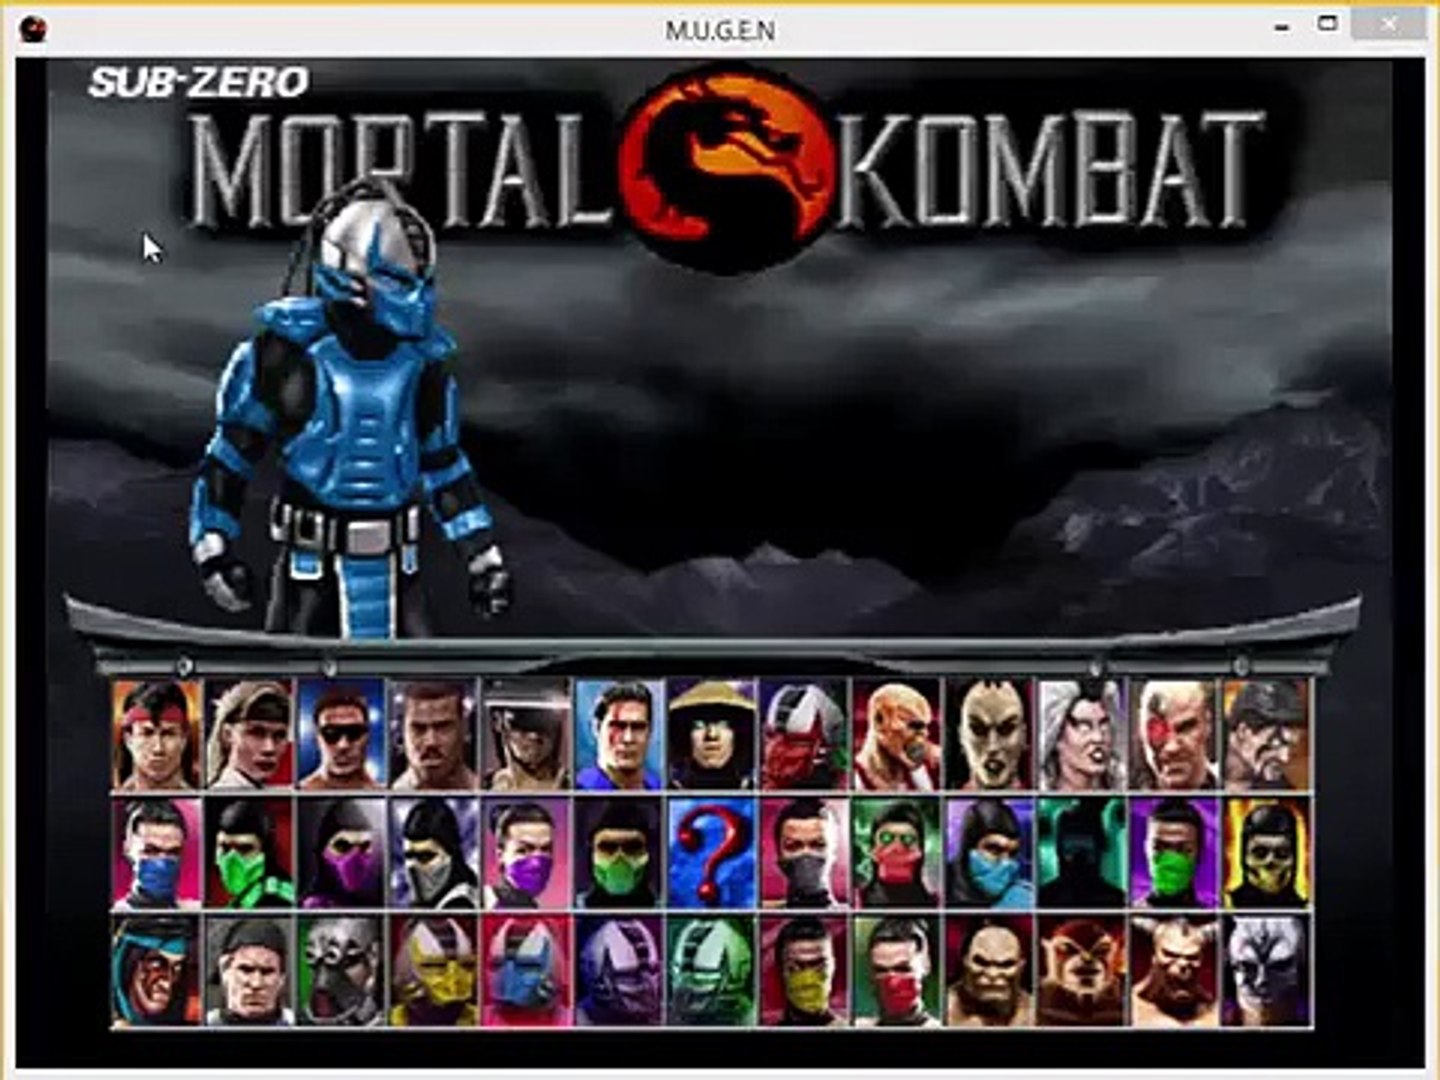 halcón audible policía Mortal Kombat Project 4.1 (Borg117 fixed edition with sound edits) Cyber  Sub Zero Gameplay - video Dailymotion